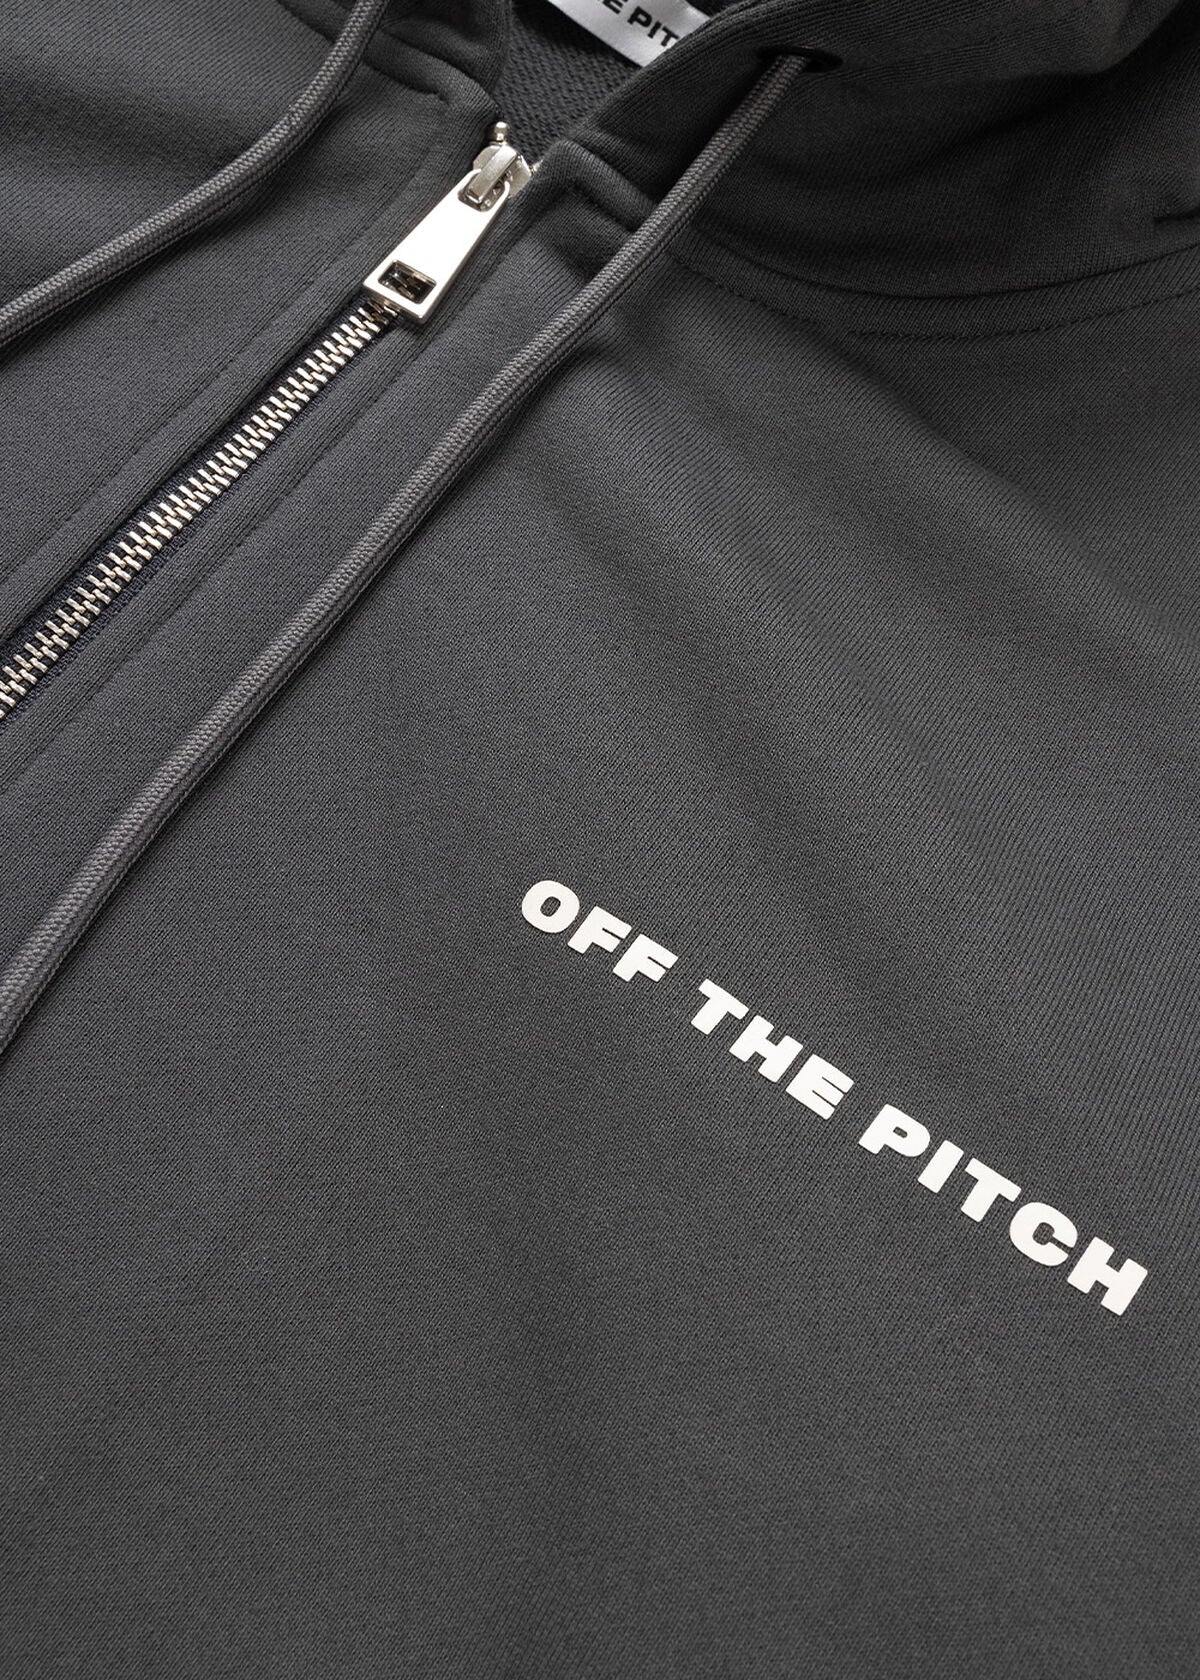 Off The Pitch Duplicate Hood Vest